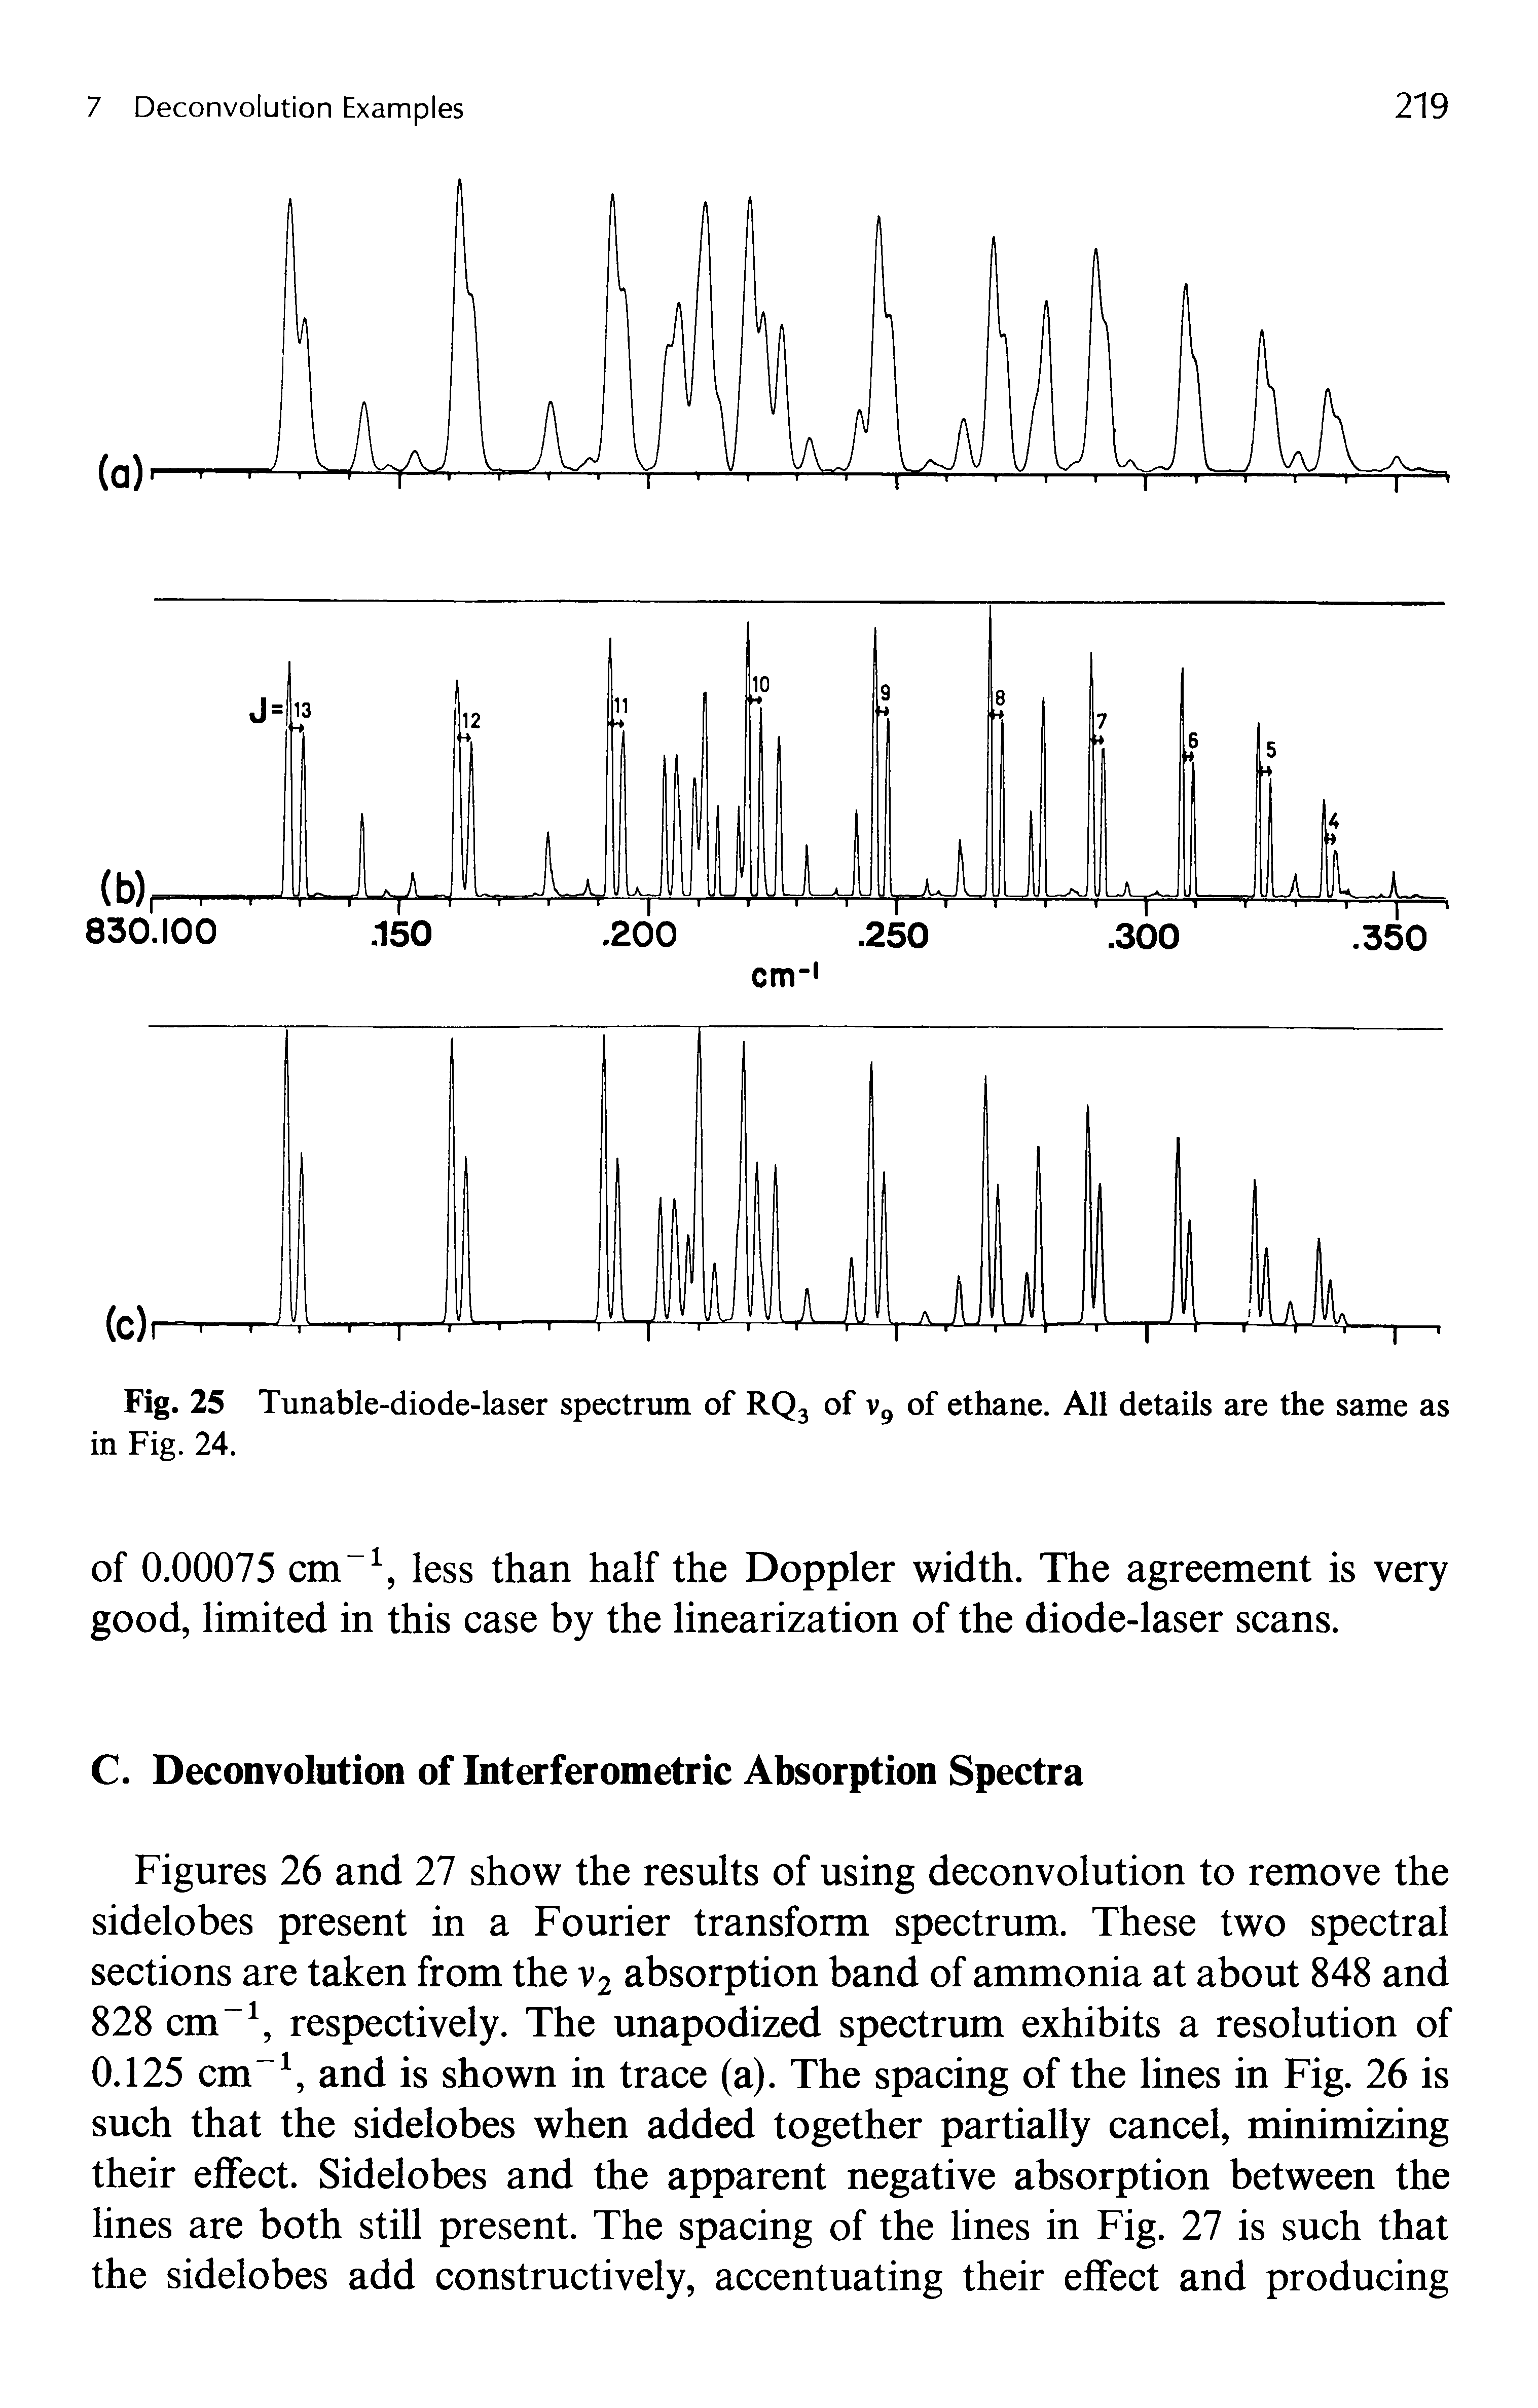 Figures 26 and 27 show the results of using deconvolution to remove the sidelobes present in a Fourier transform spectrum. These two spectral sections are taken from the v2 absorption band of ammonia at about 848 and 828 cm-1, respectively. The unapodized spectrum exhibits a resolution of 0.125 cm-1, and is shown in trace (a). The spacing of the lines in Fig. 26 is such that the sidelobes when added together partially cancel, minimizing their effect. Sidelobes and the apparent negative absorption between the lines are both still present. The spacing of the lines in Fig. 27 is such that the sidelobes add constructively, accentuating their effect and producing...